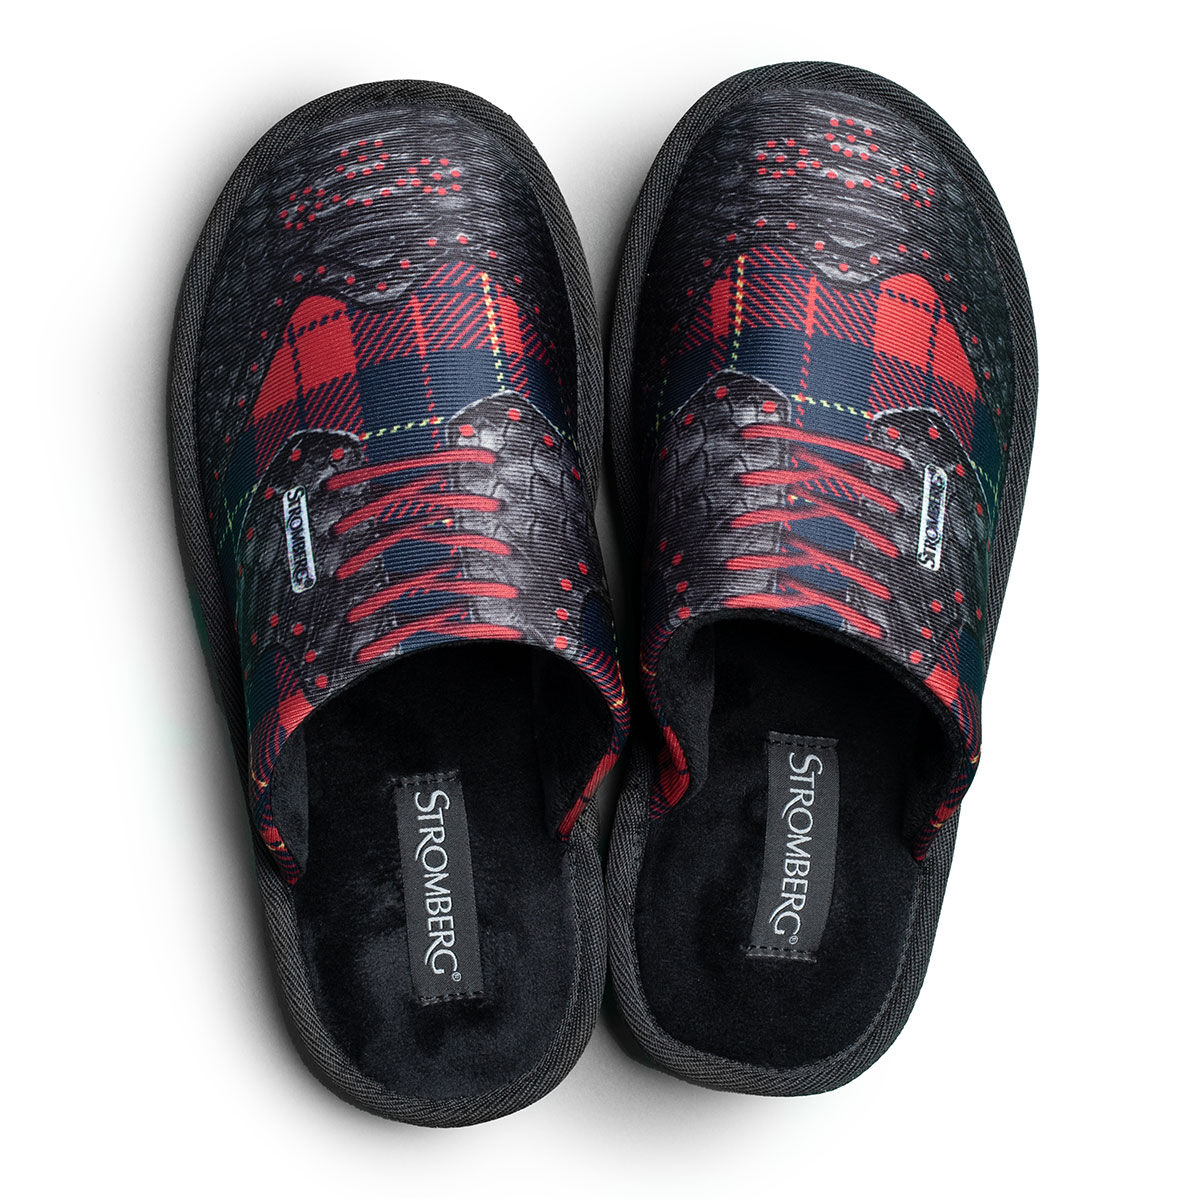 Stromberg Black, Grey and Red Comfortable Tartan Mule Golf Slippers, Size: 7 | American Golf